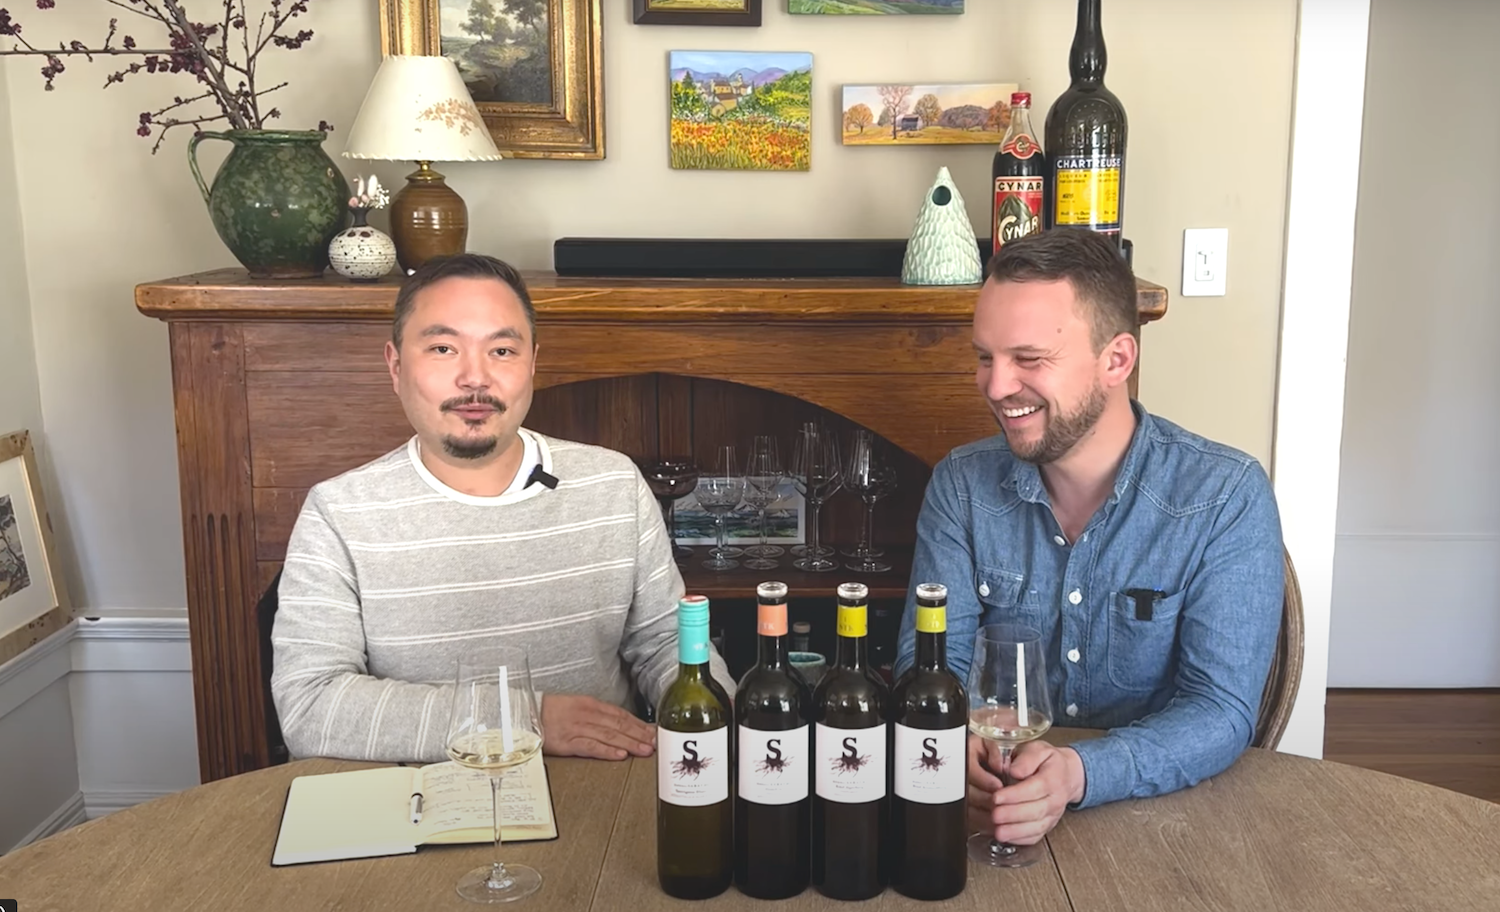 Load video: Andrey and Advanced Sommelier &amp; Cellar Master at Lazy Bear San Francisco, Dan Pendleton dig into Styrian Sunshine in the wines of Hannes Sabathi in Sudsteiermark.